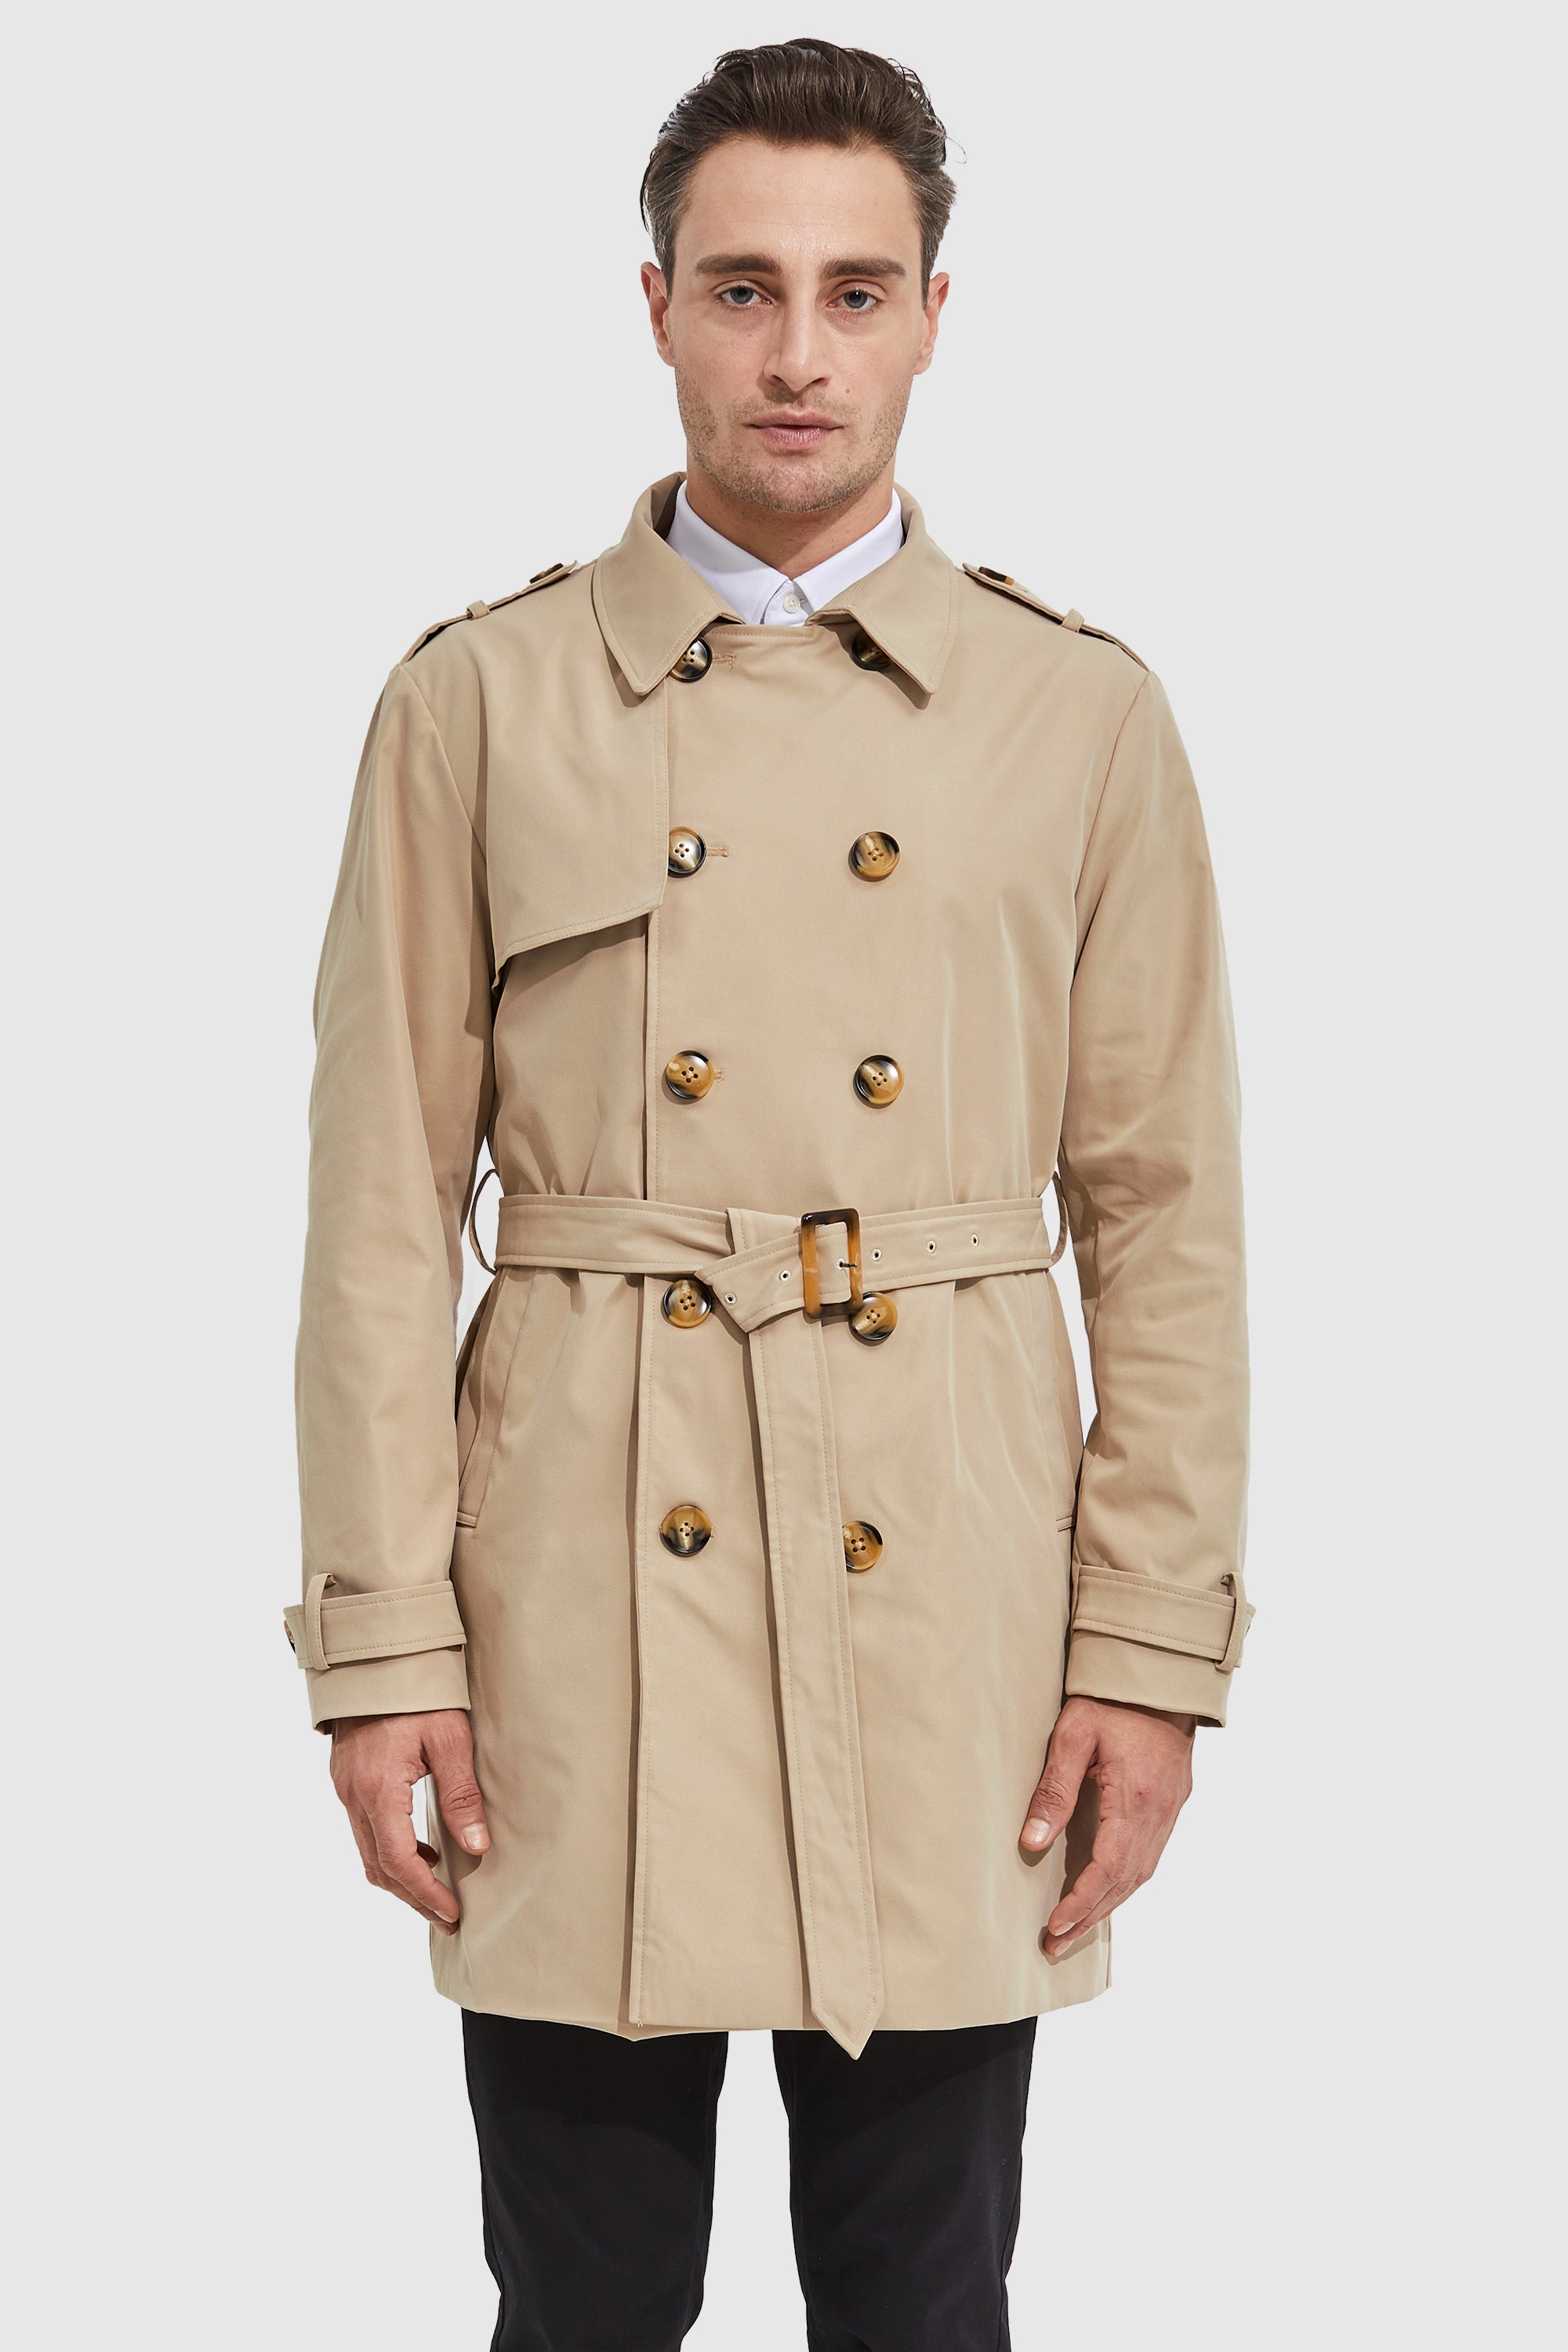 Long Double Breasted Trench Coat